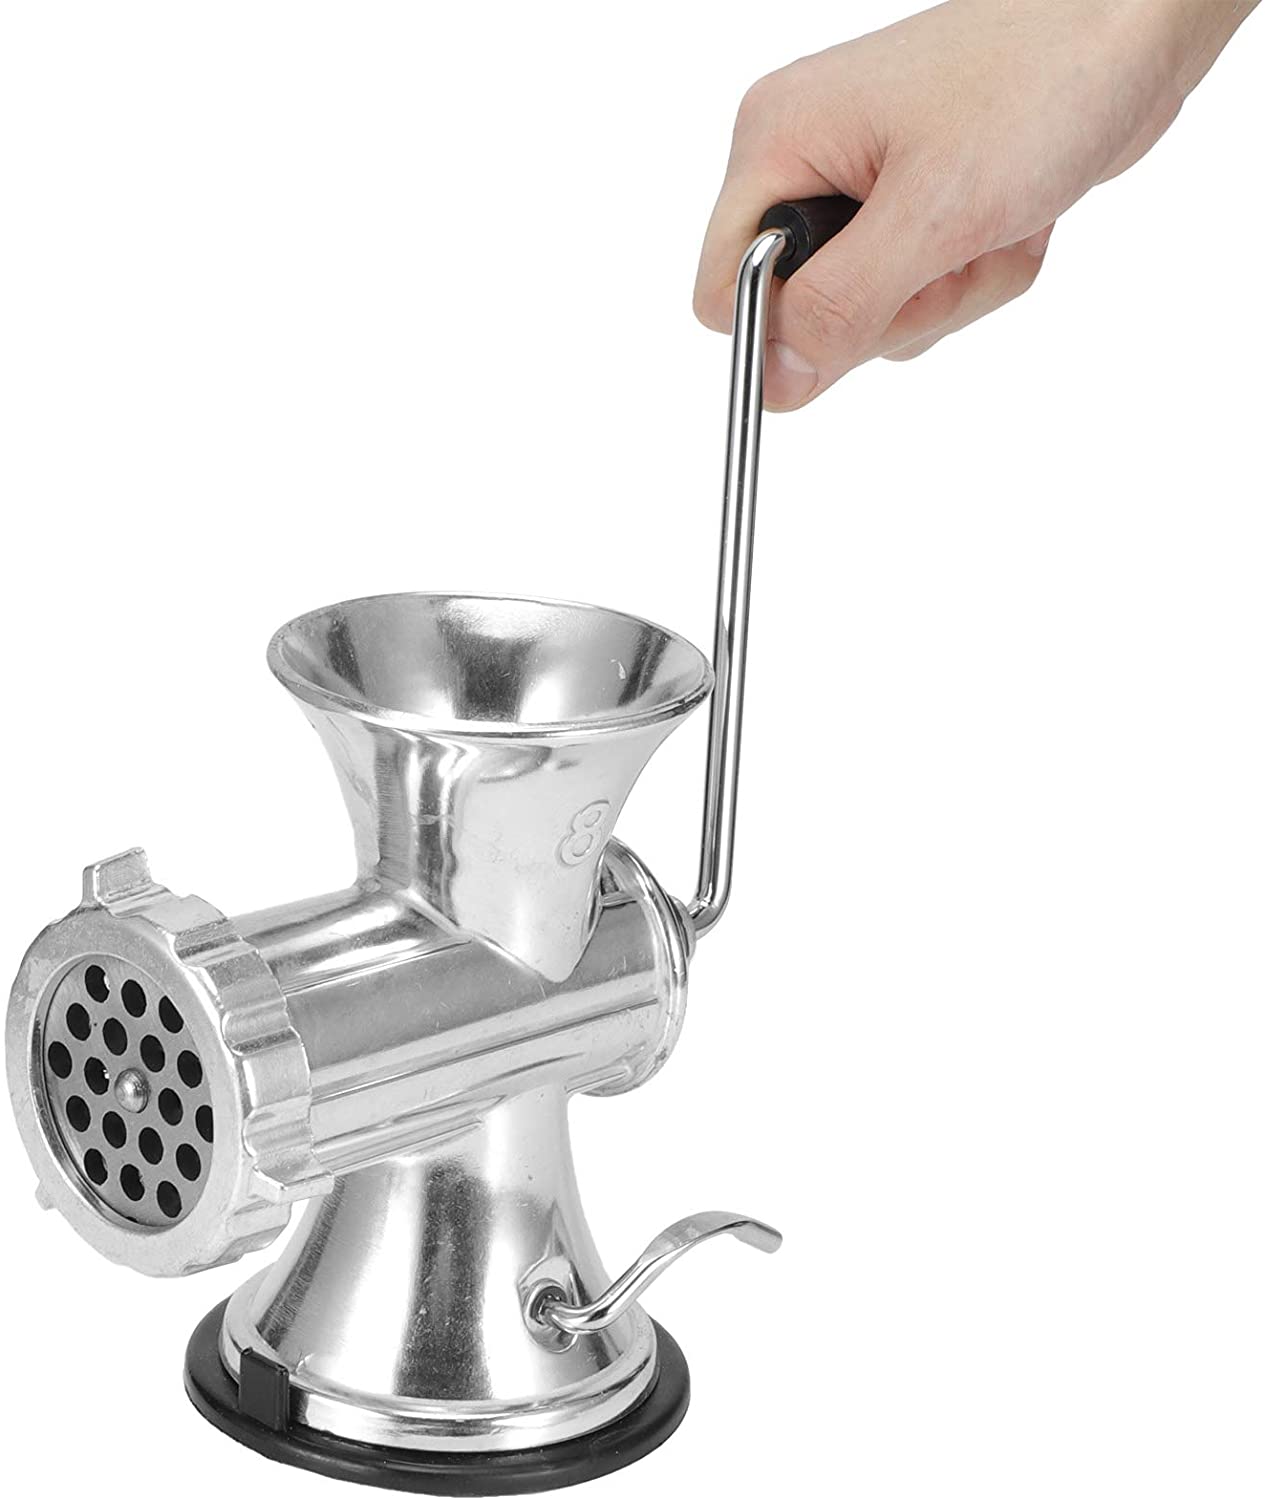 Asixxsix Manual Meat Mincer, Meat Mincer, Durable for Meat Vegetables Fruit Spice